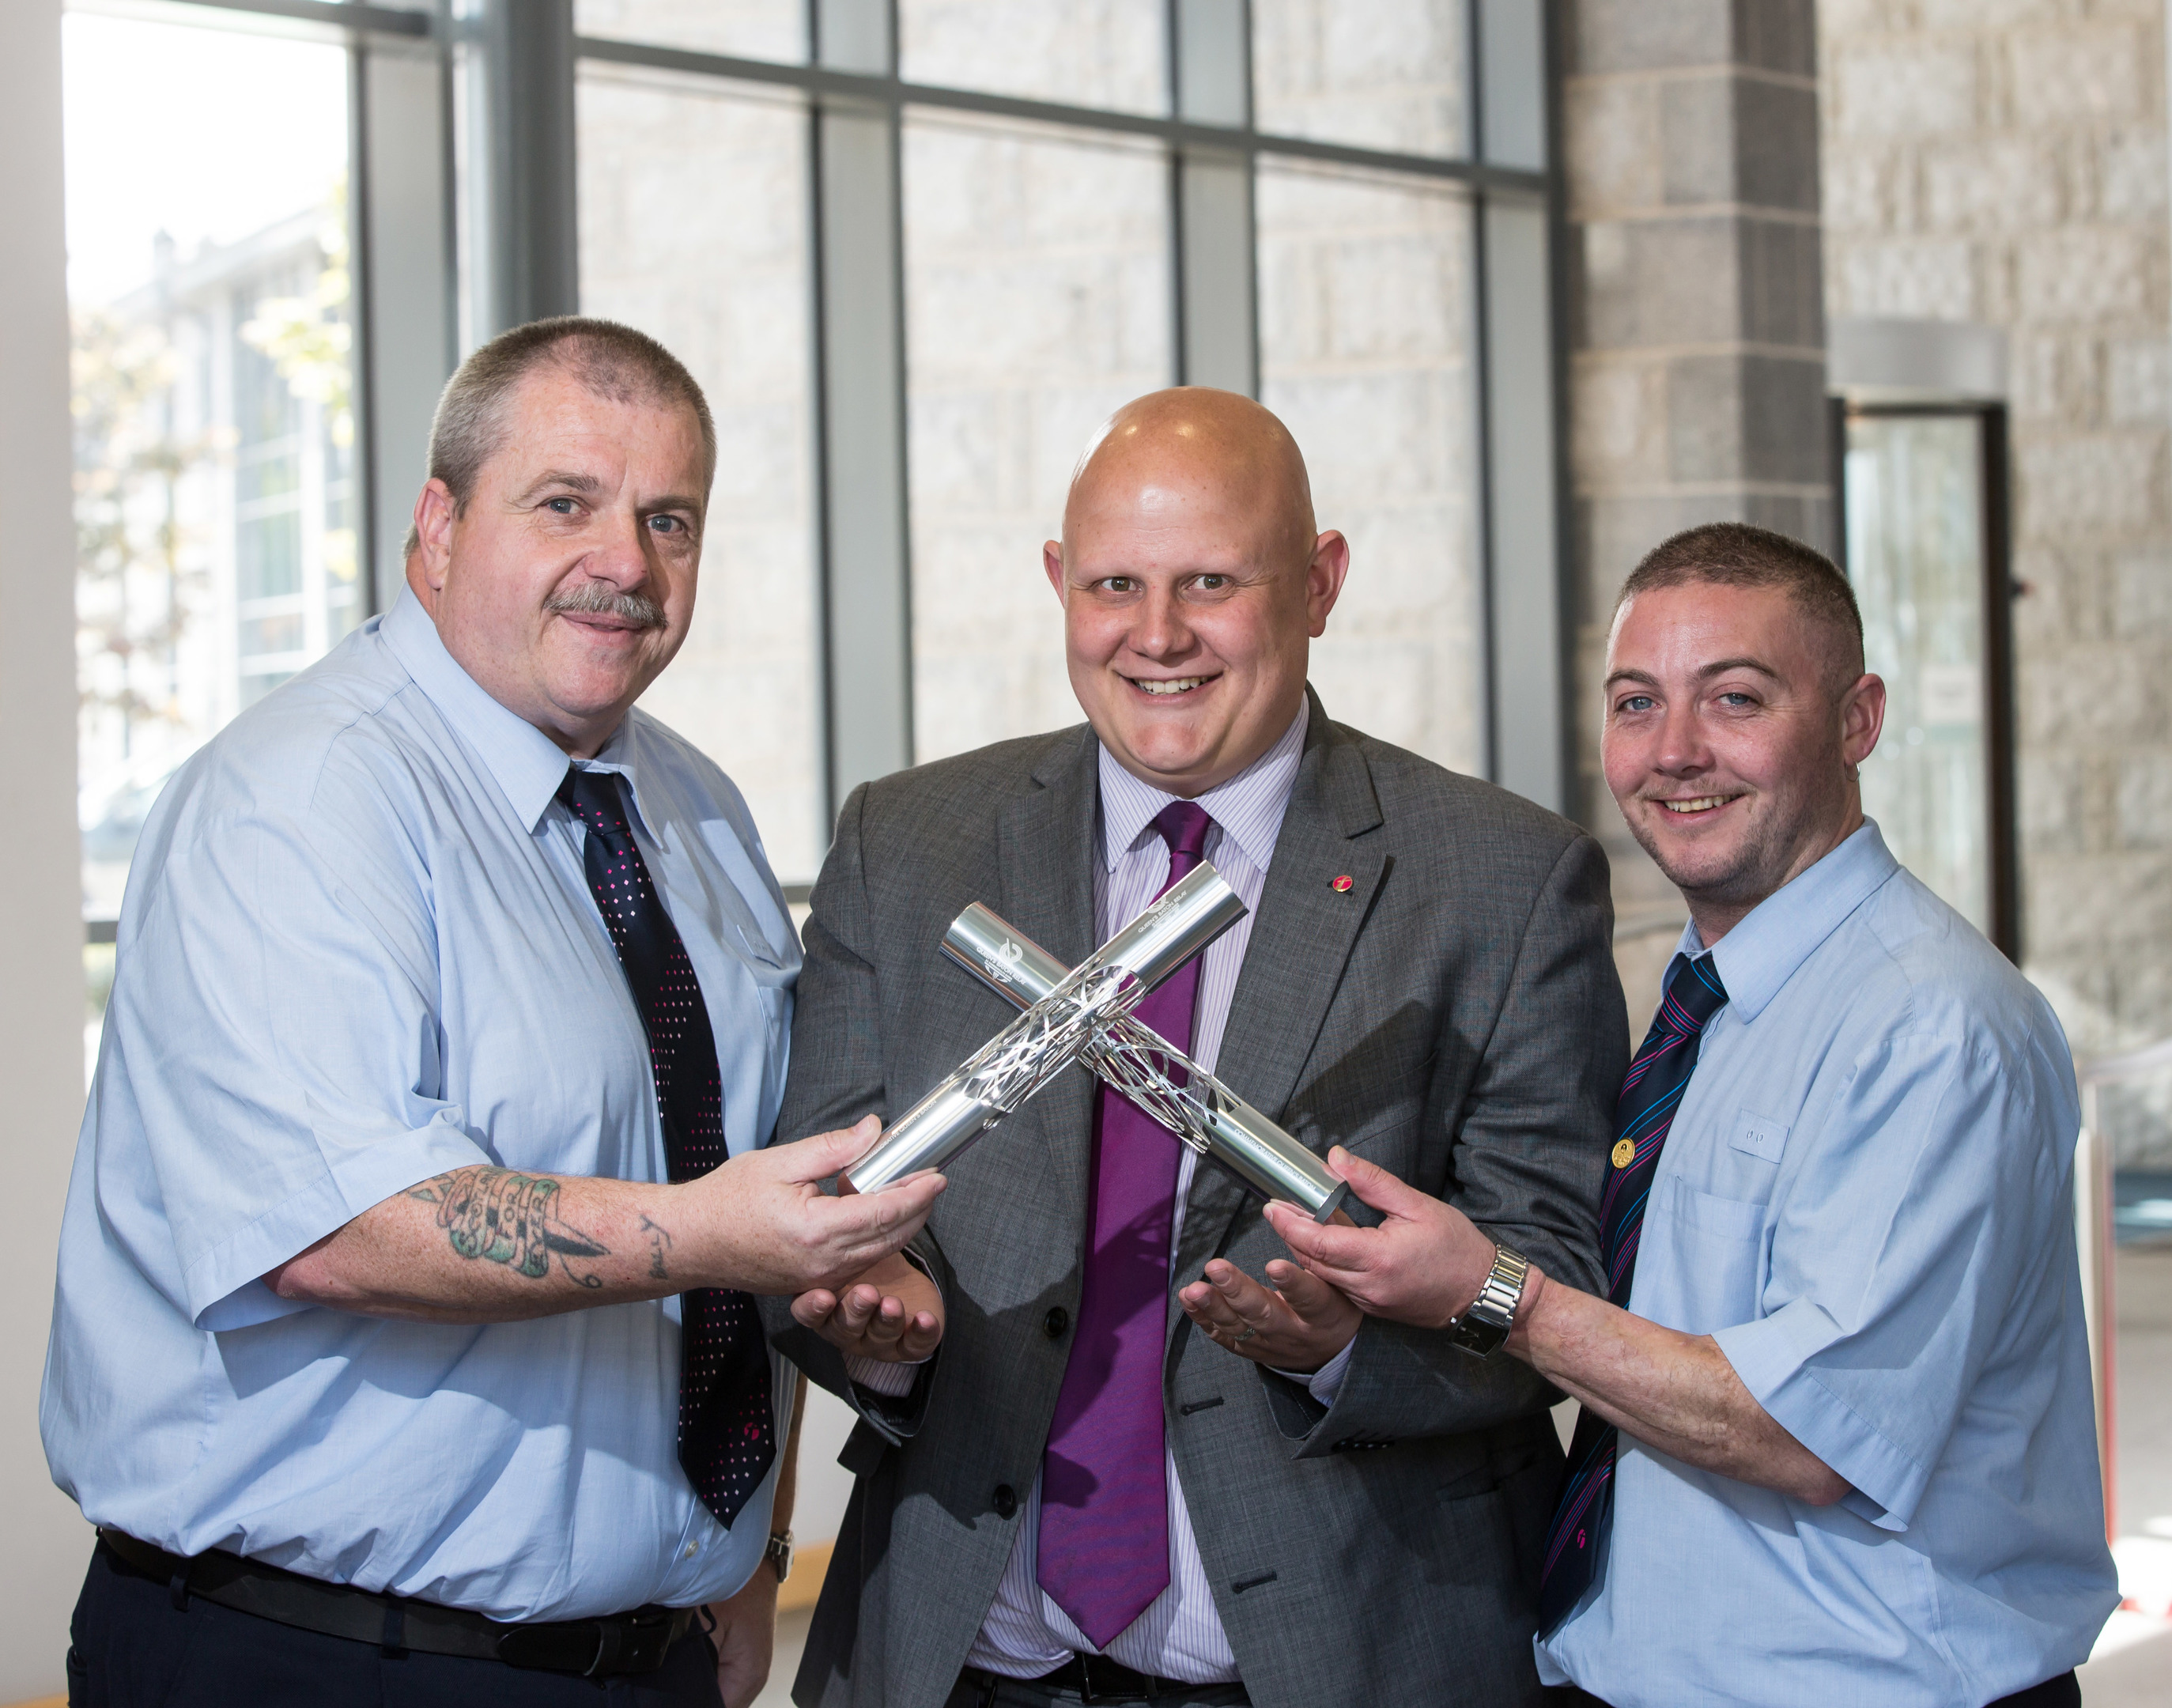 PICTURES FOR YOU FIRST MAGAZINE AT ABERDEEN BUS DEPOT.
PICTURE SHOWS DRIVERS ANDREW BALLANTYNE (LEFT) AND SHANE MITCHELL (RIGHT) BEING PRESENTED WITH COMMEMORATIVE BATONS BY ABERDEEN MD DAVID PHILLIPS (CENTRE)AFTER THEY RAN IN THE COMMONWEALTH GAMES RELAY.